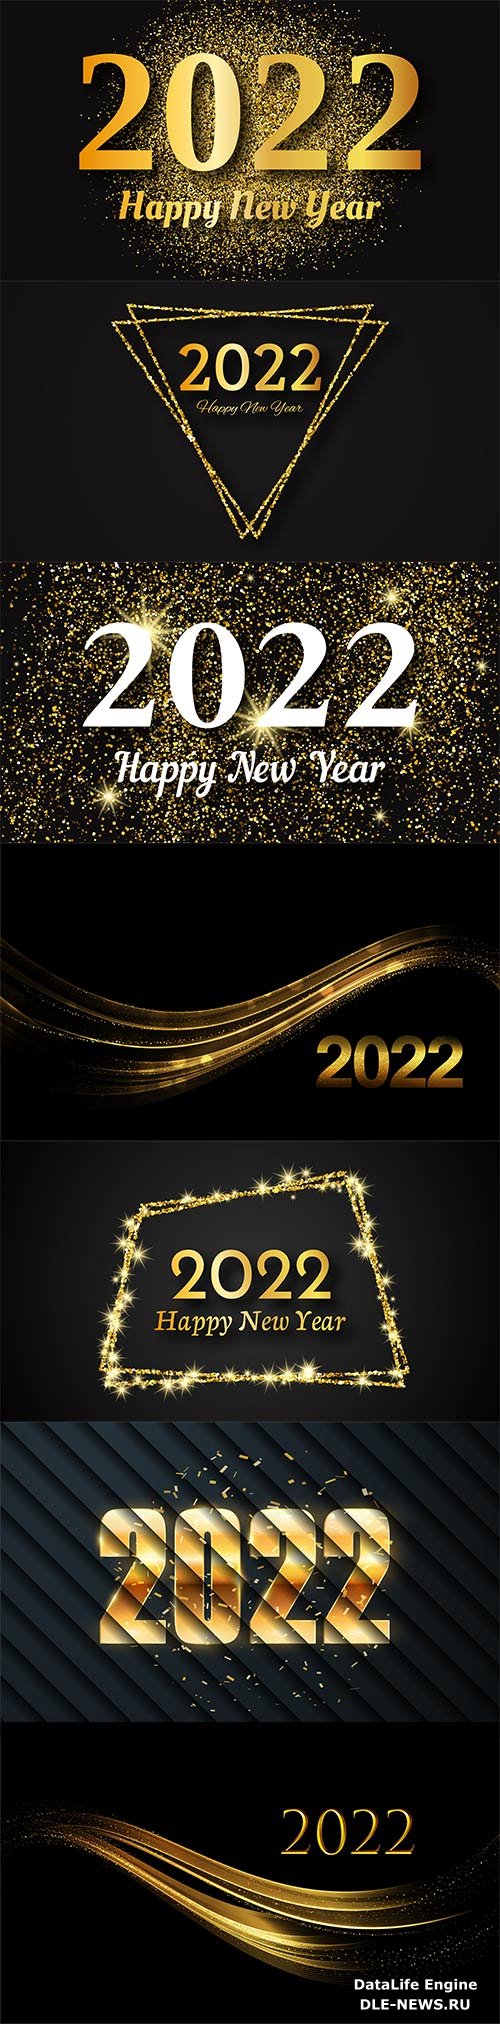 2022 happy new year vector background, gold inscription in a gold glitter